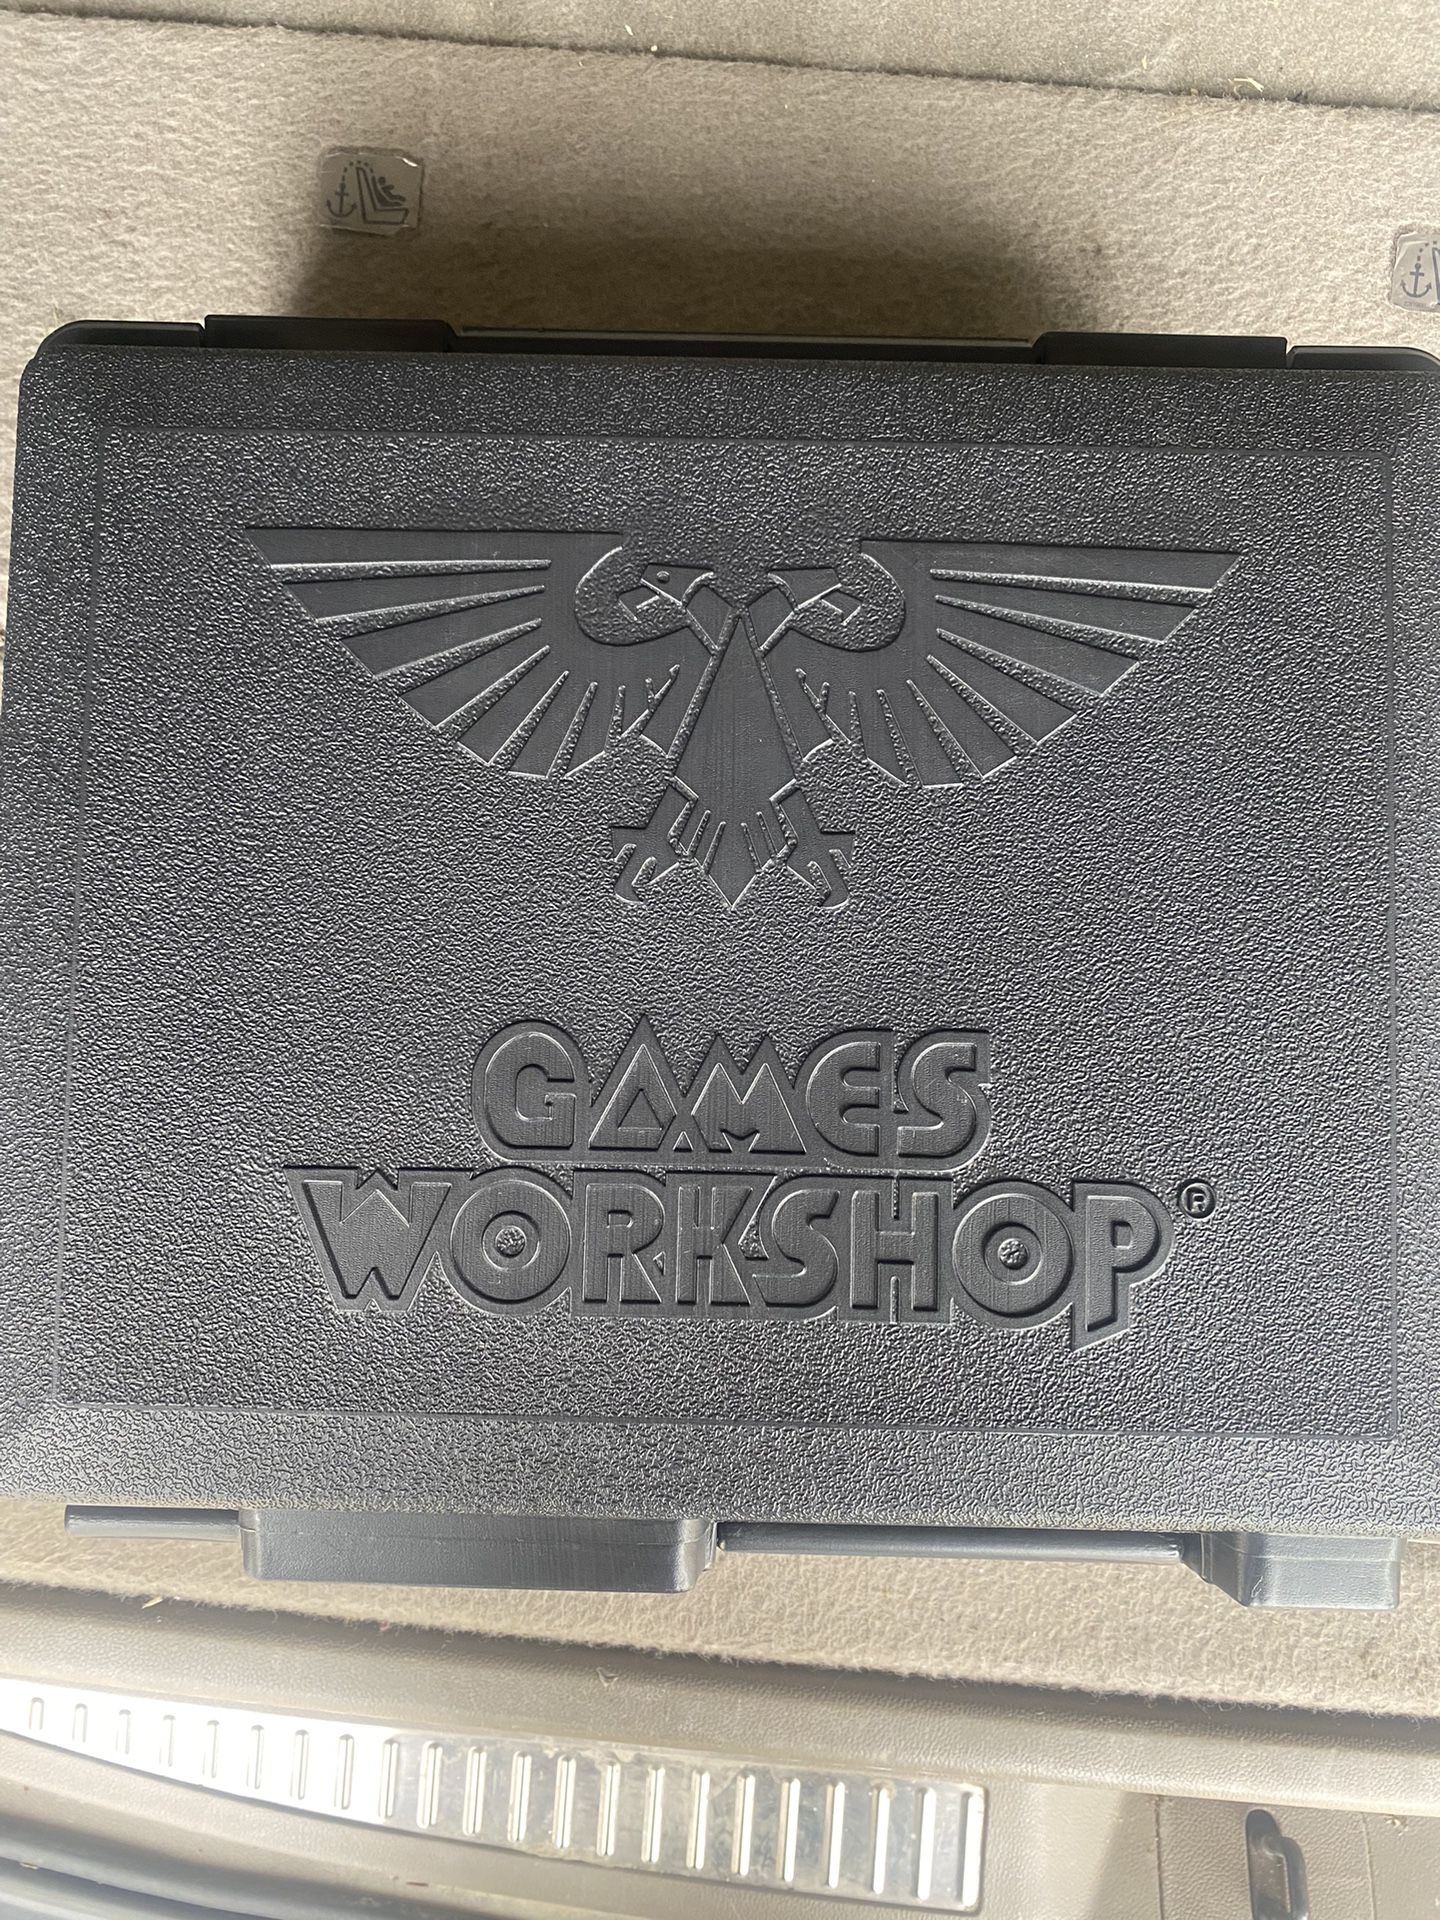 Games Workshop With Warhammer Collectibles 